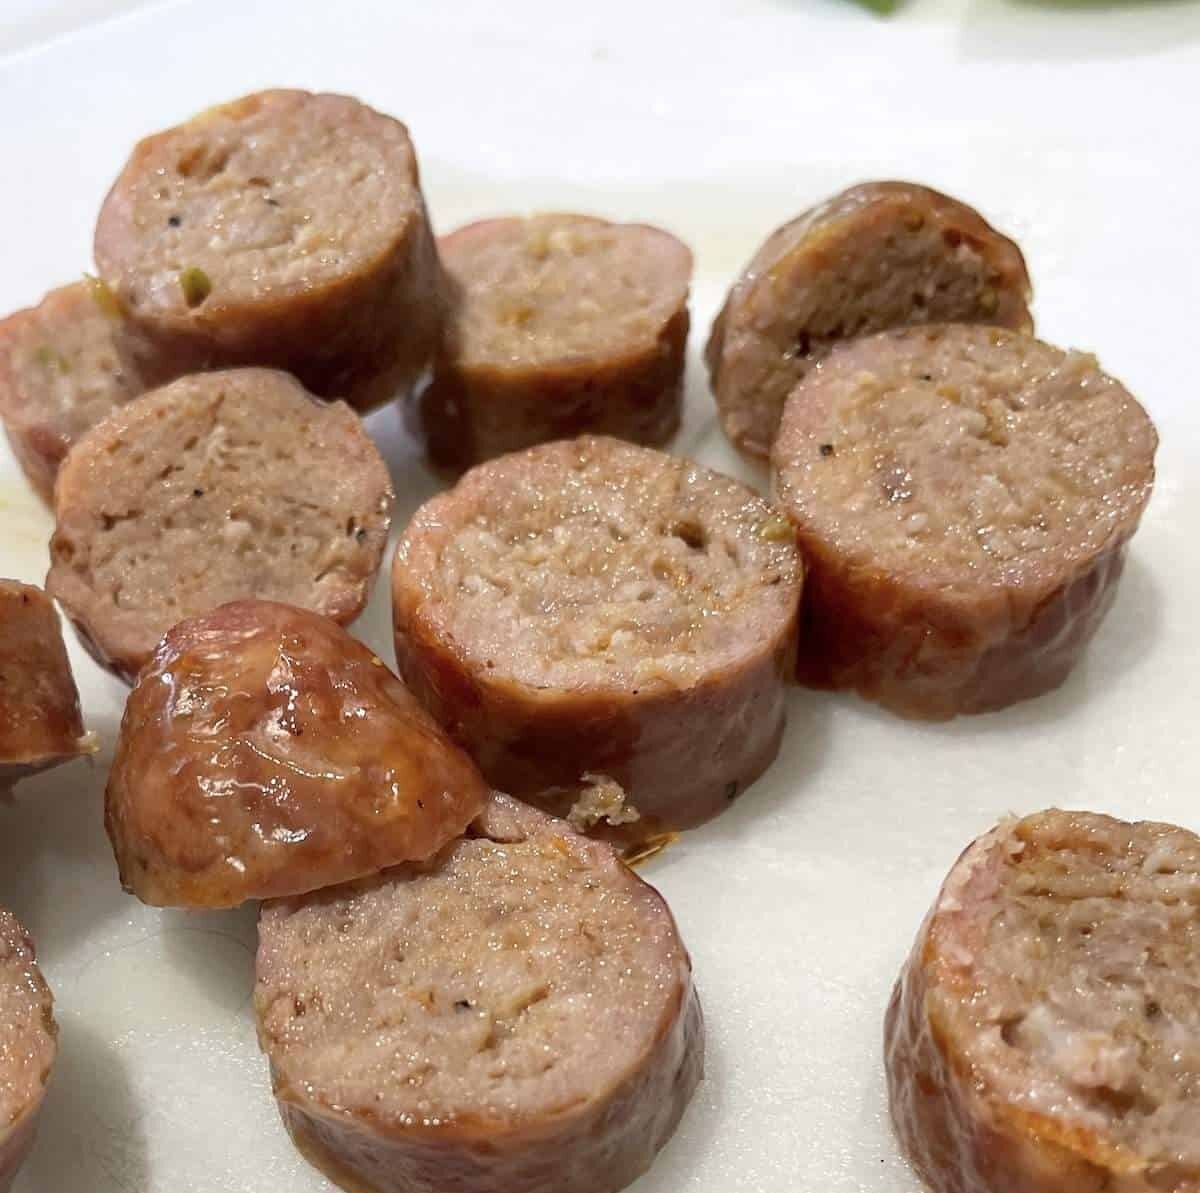 Oven-baked, sliced Italian sausage on a white cutting board.